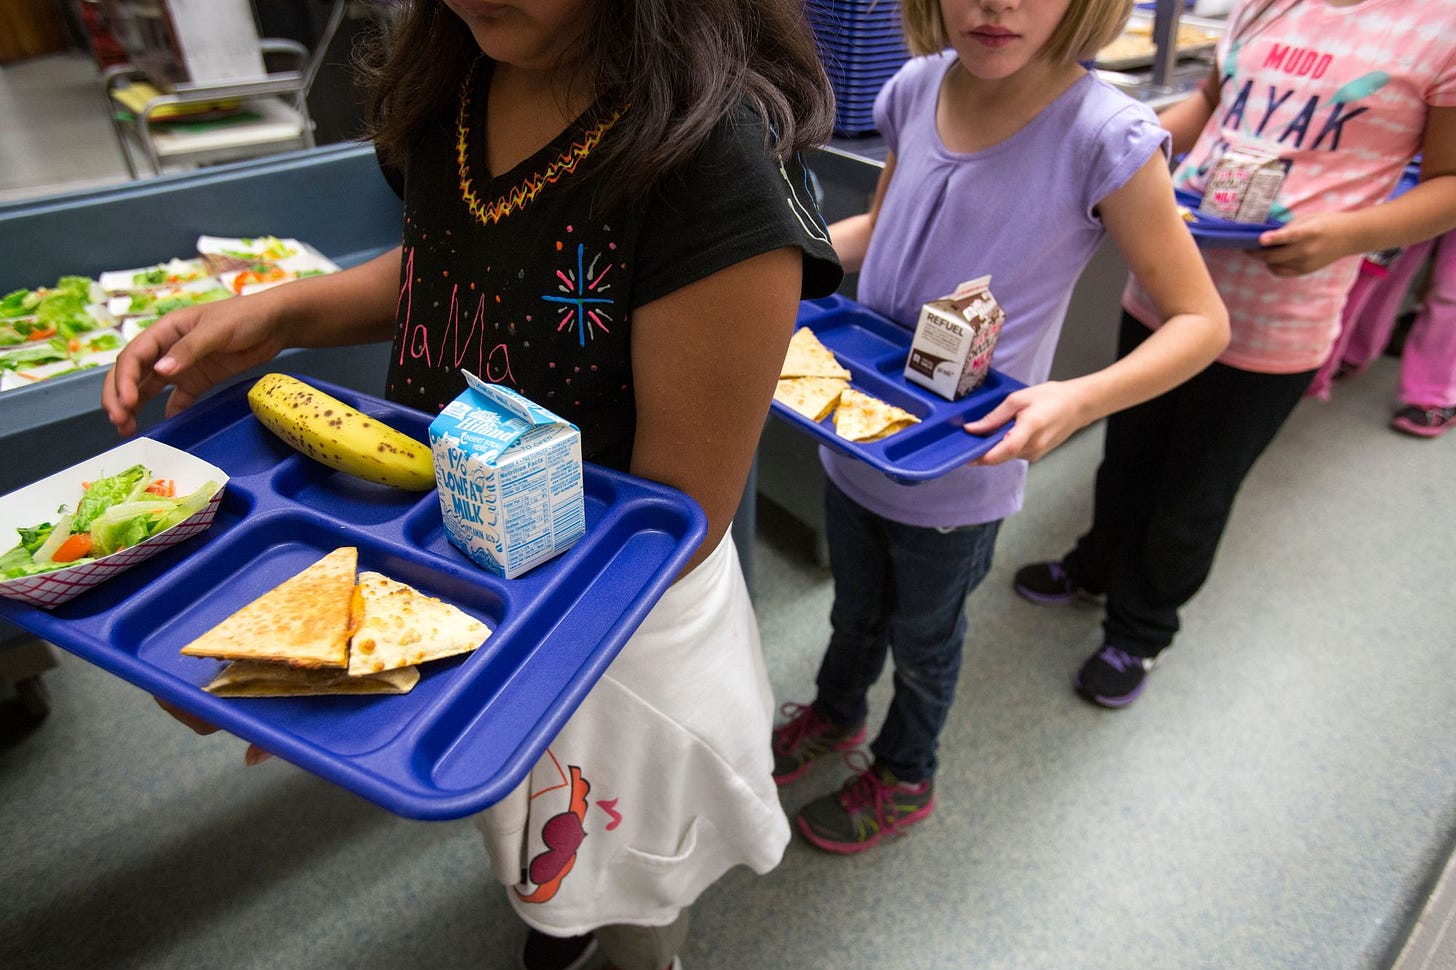 St. Louis archdiocese: Students won't lose their lunch over federal program decision